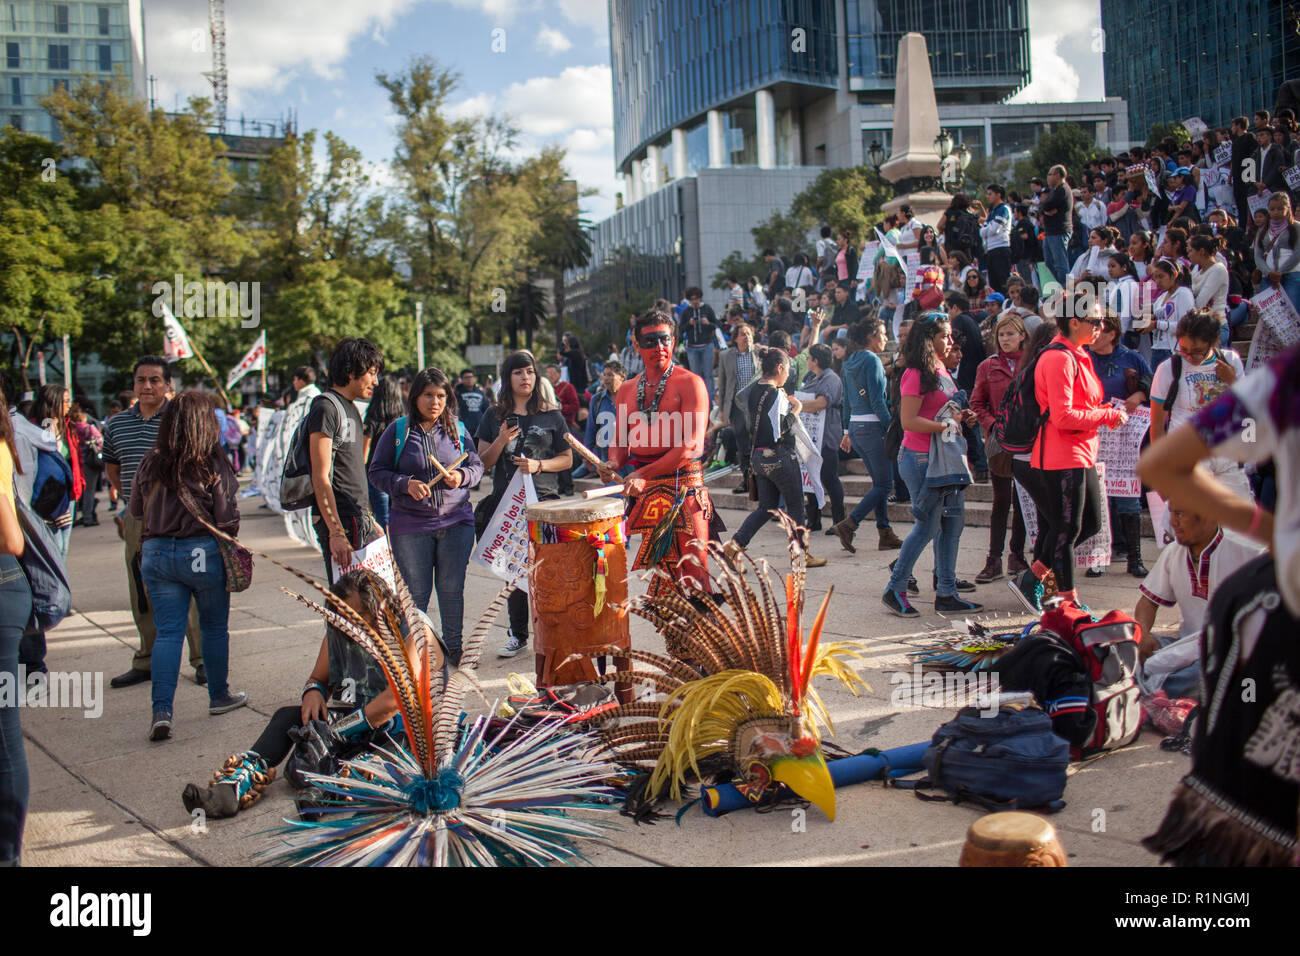 People march through Mexico City during the 'Global Day of Action for Ayotzinapa' Wednesday, October 23, 2014.  The march was held to demand answers following the killing of three students and the disappearance of 43 more in the city of  Ayotzinapa, Guerrero, which is South West of Mexico City.  The students have been missing since September 26, 2014 and the local mayor and his wife are accused of ordering the kidnappings and killings. The local police are also accused of working with  the Guerreros Unidos cartel in the crimes.   Since September 26, many mass graves have been located in the ar Stock Photo